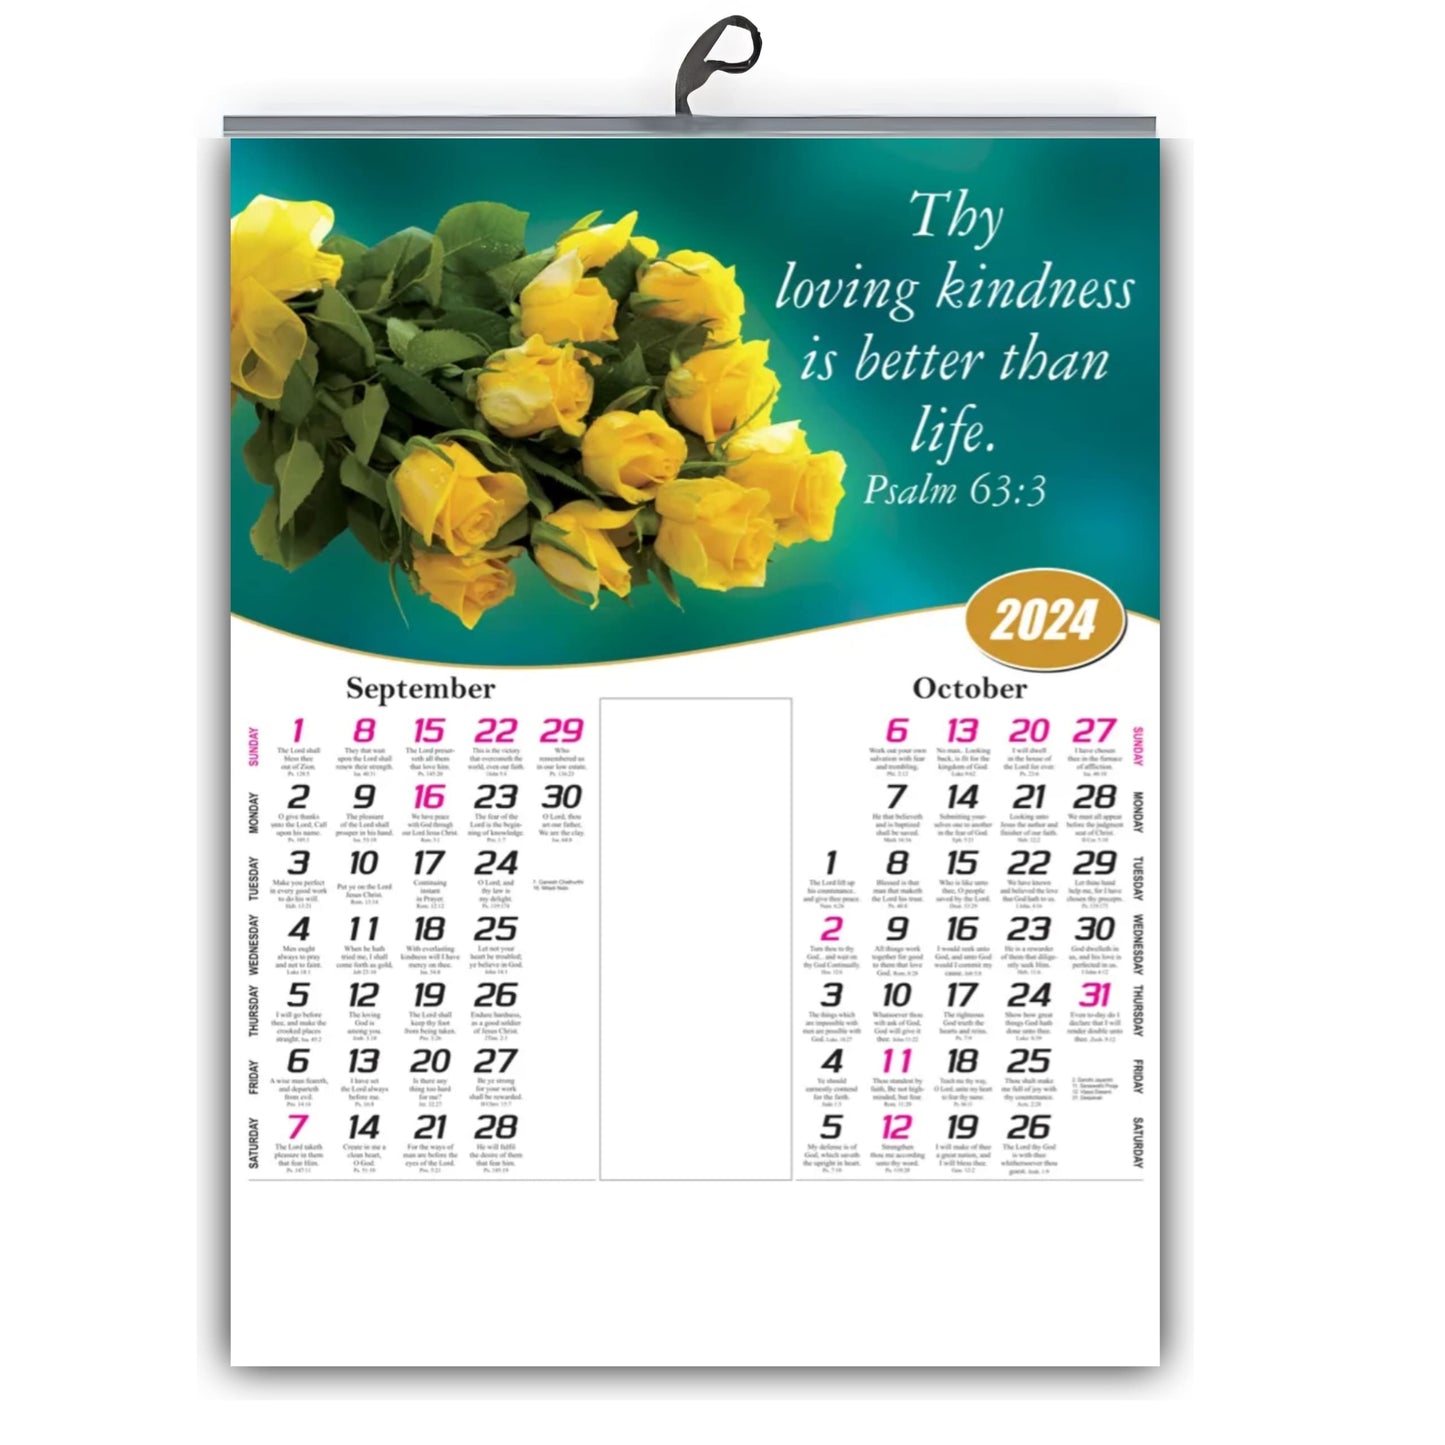 2024 English Bible Verse Wall Calendar with Colorful Images and Scripture